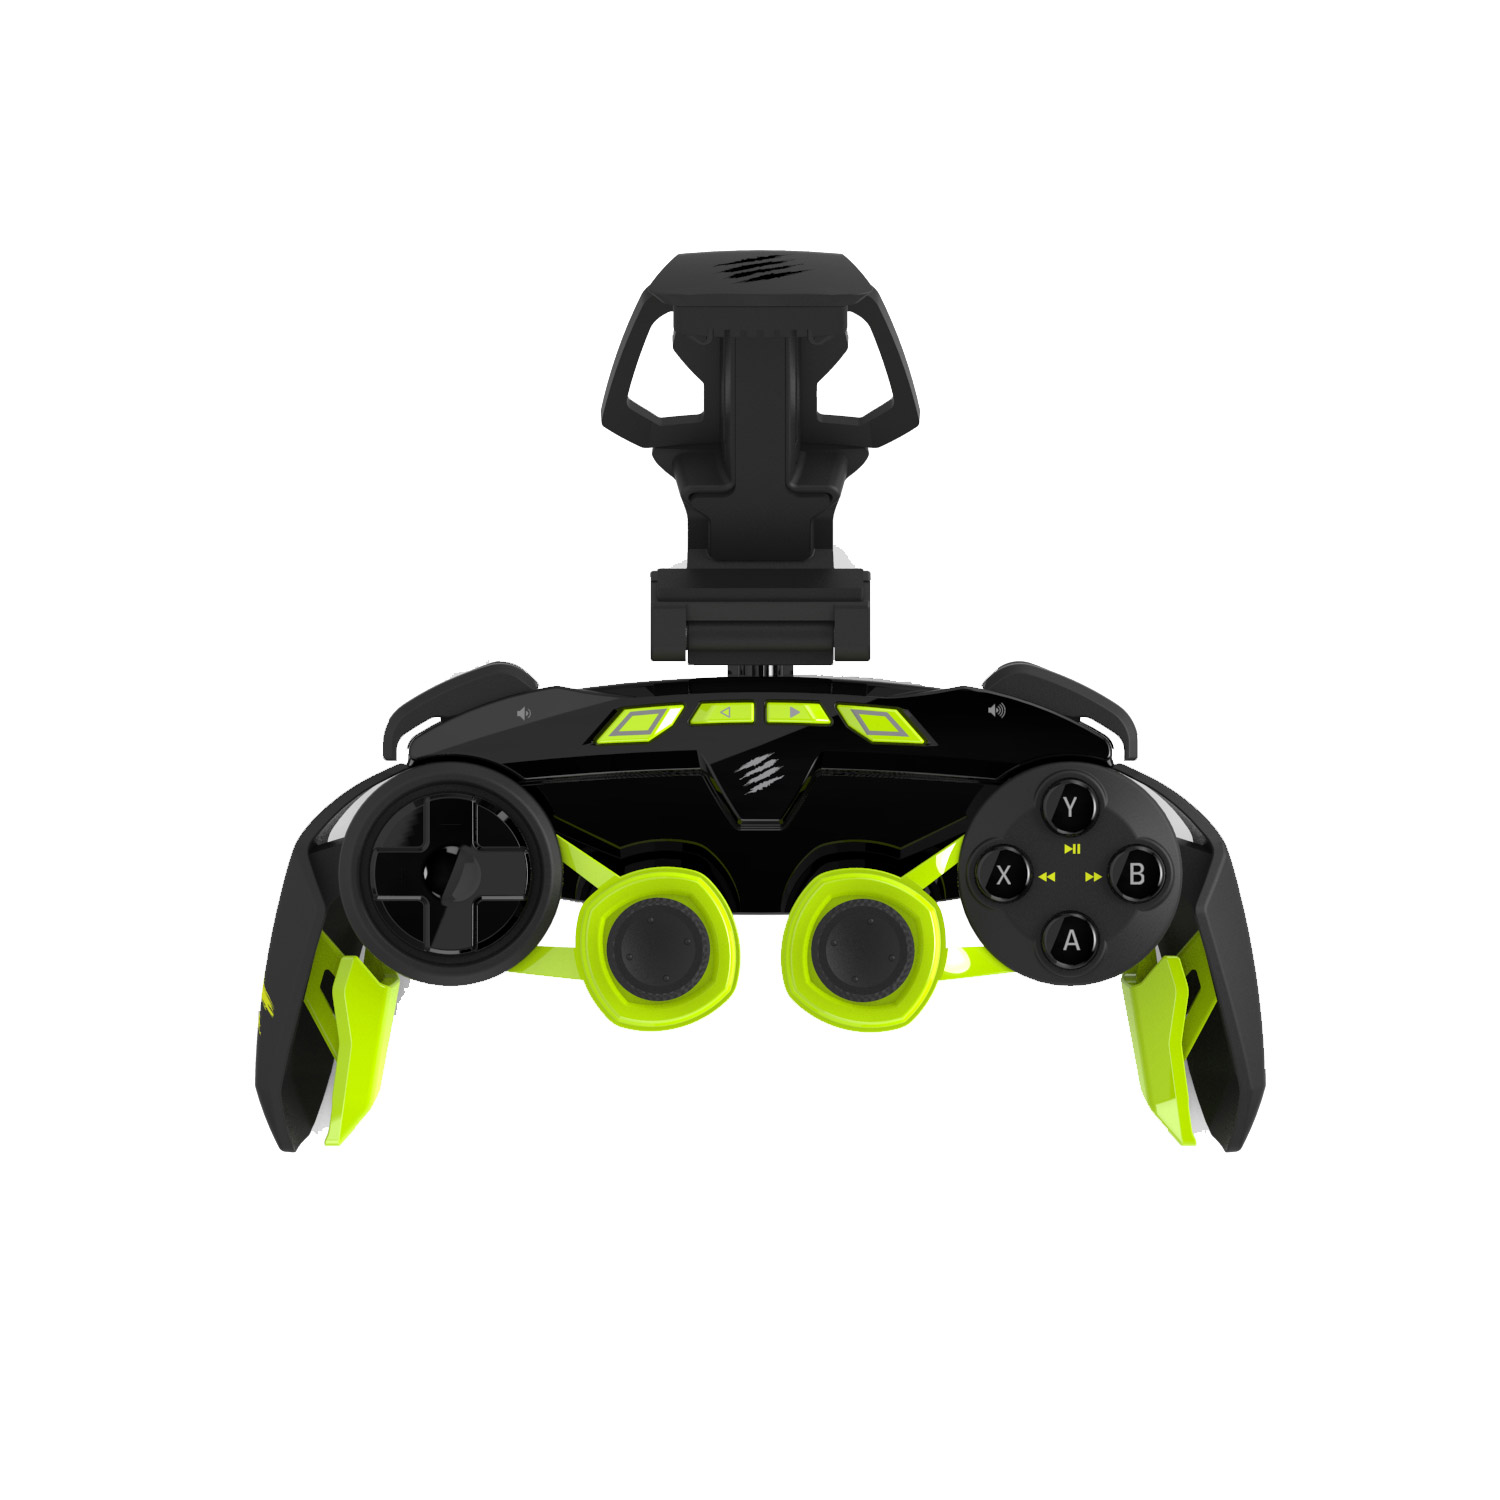 Madcatz LYNX 3 Mobile Gamepad for PC/Smart devices